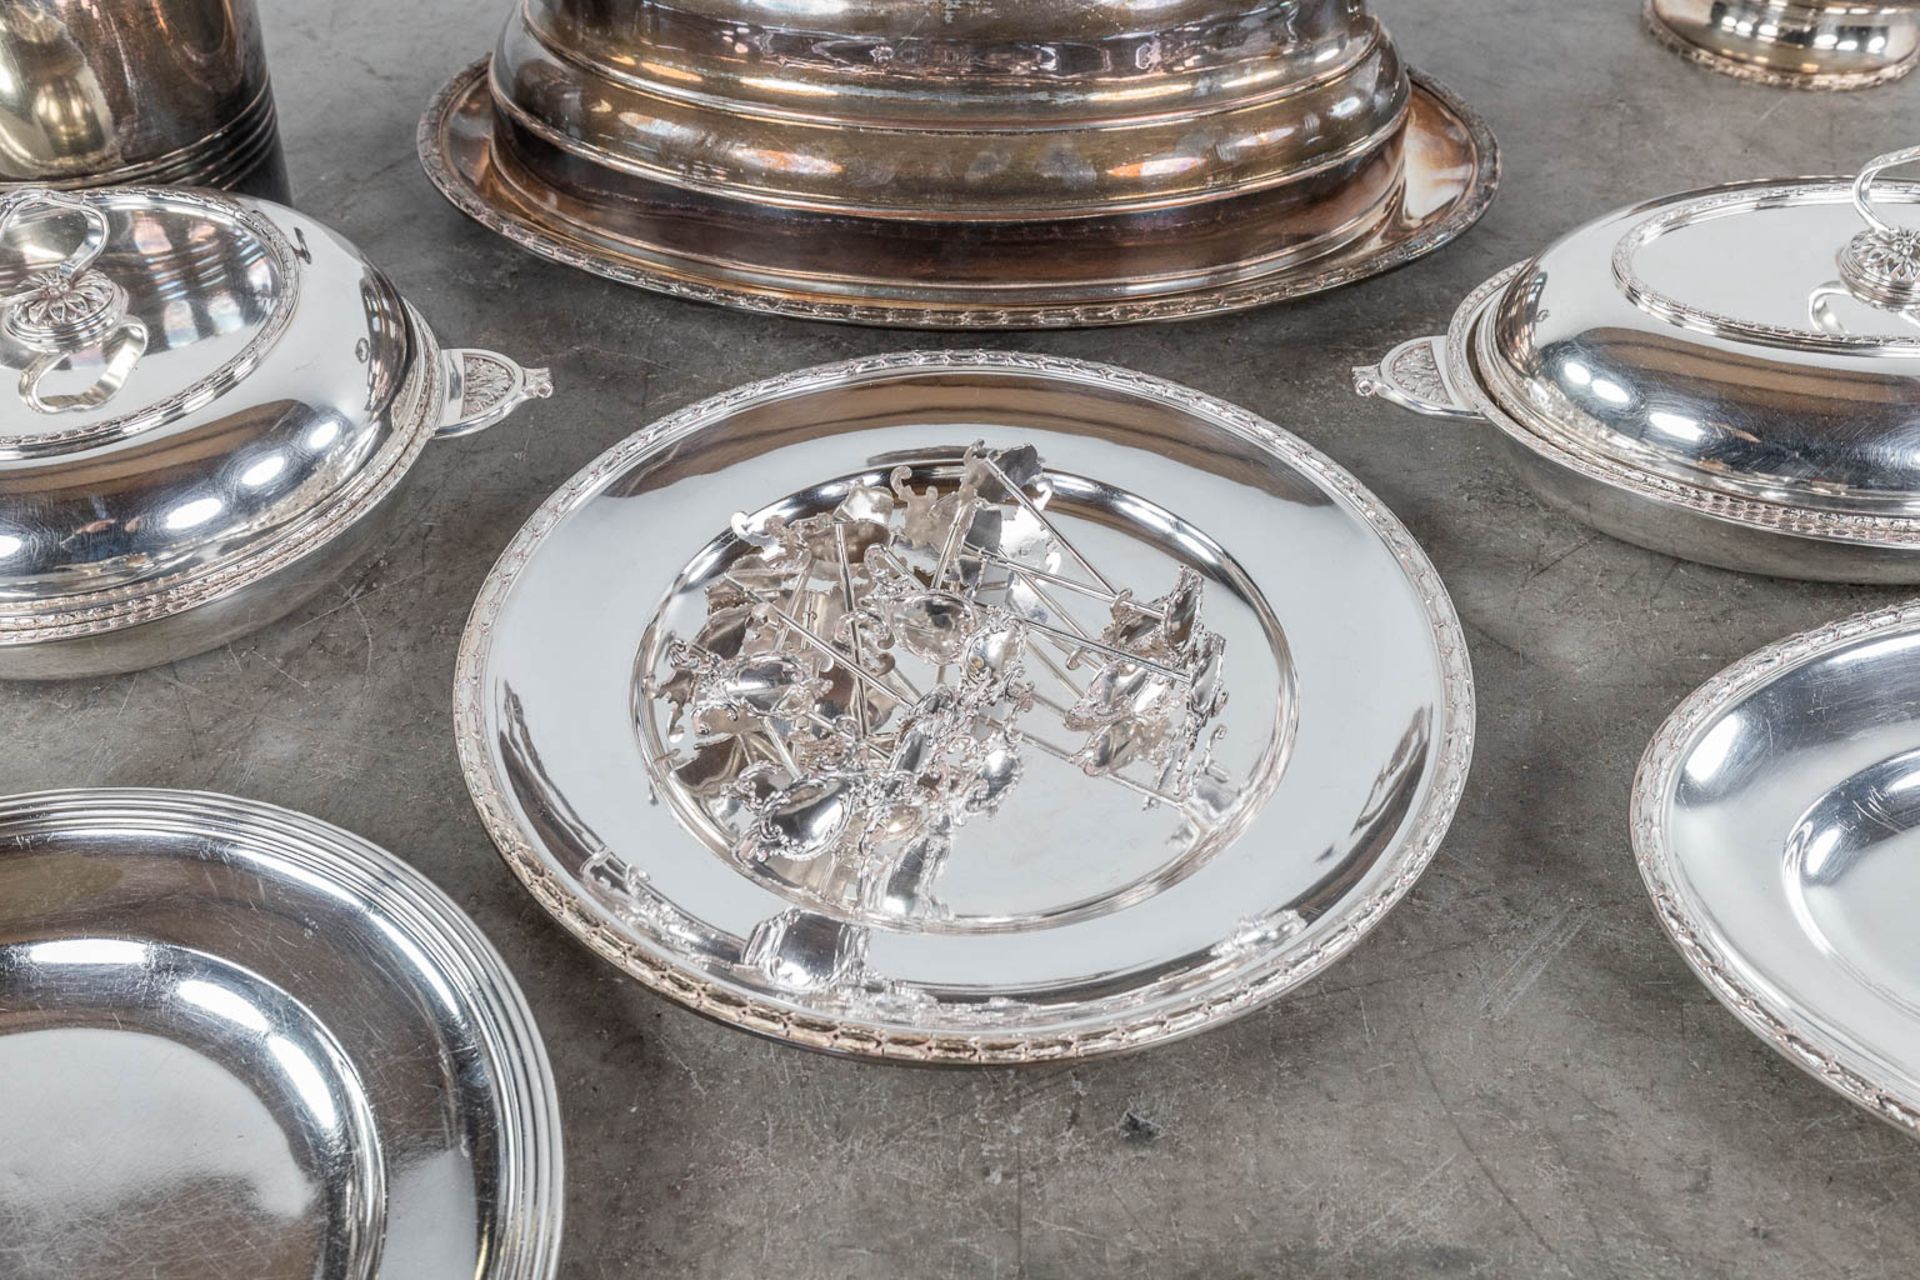 A large collection of table accessories and serving ware, silver-plated metal. (L: 32 x W: 48 cm) - Image 6 of 10